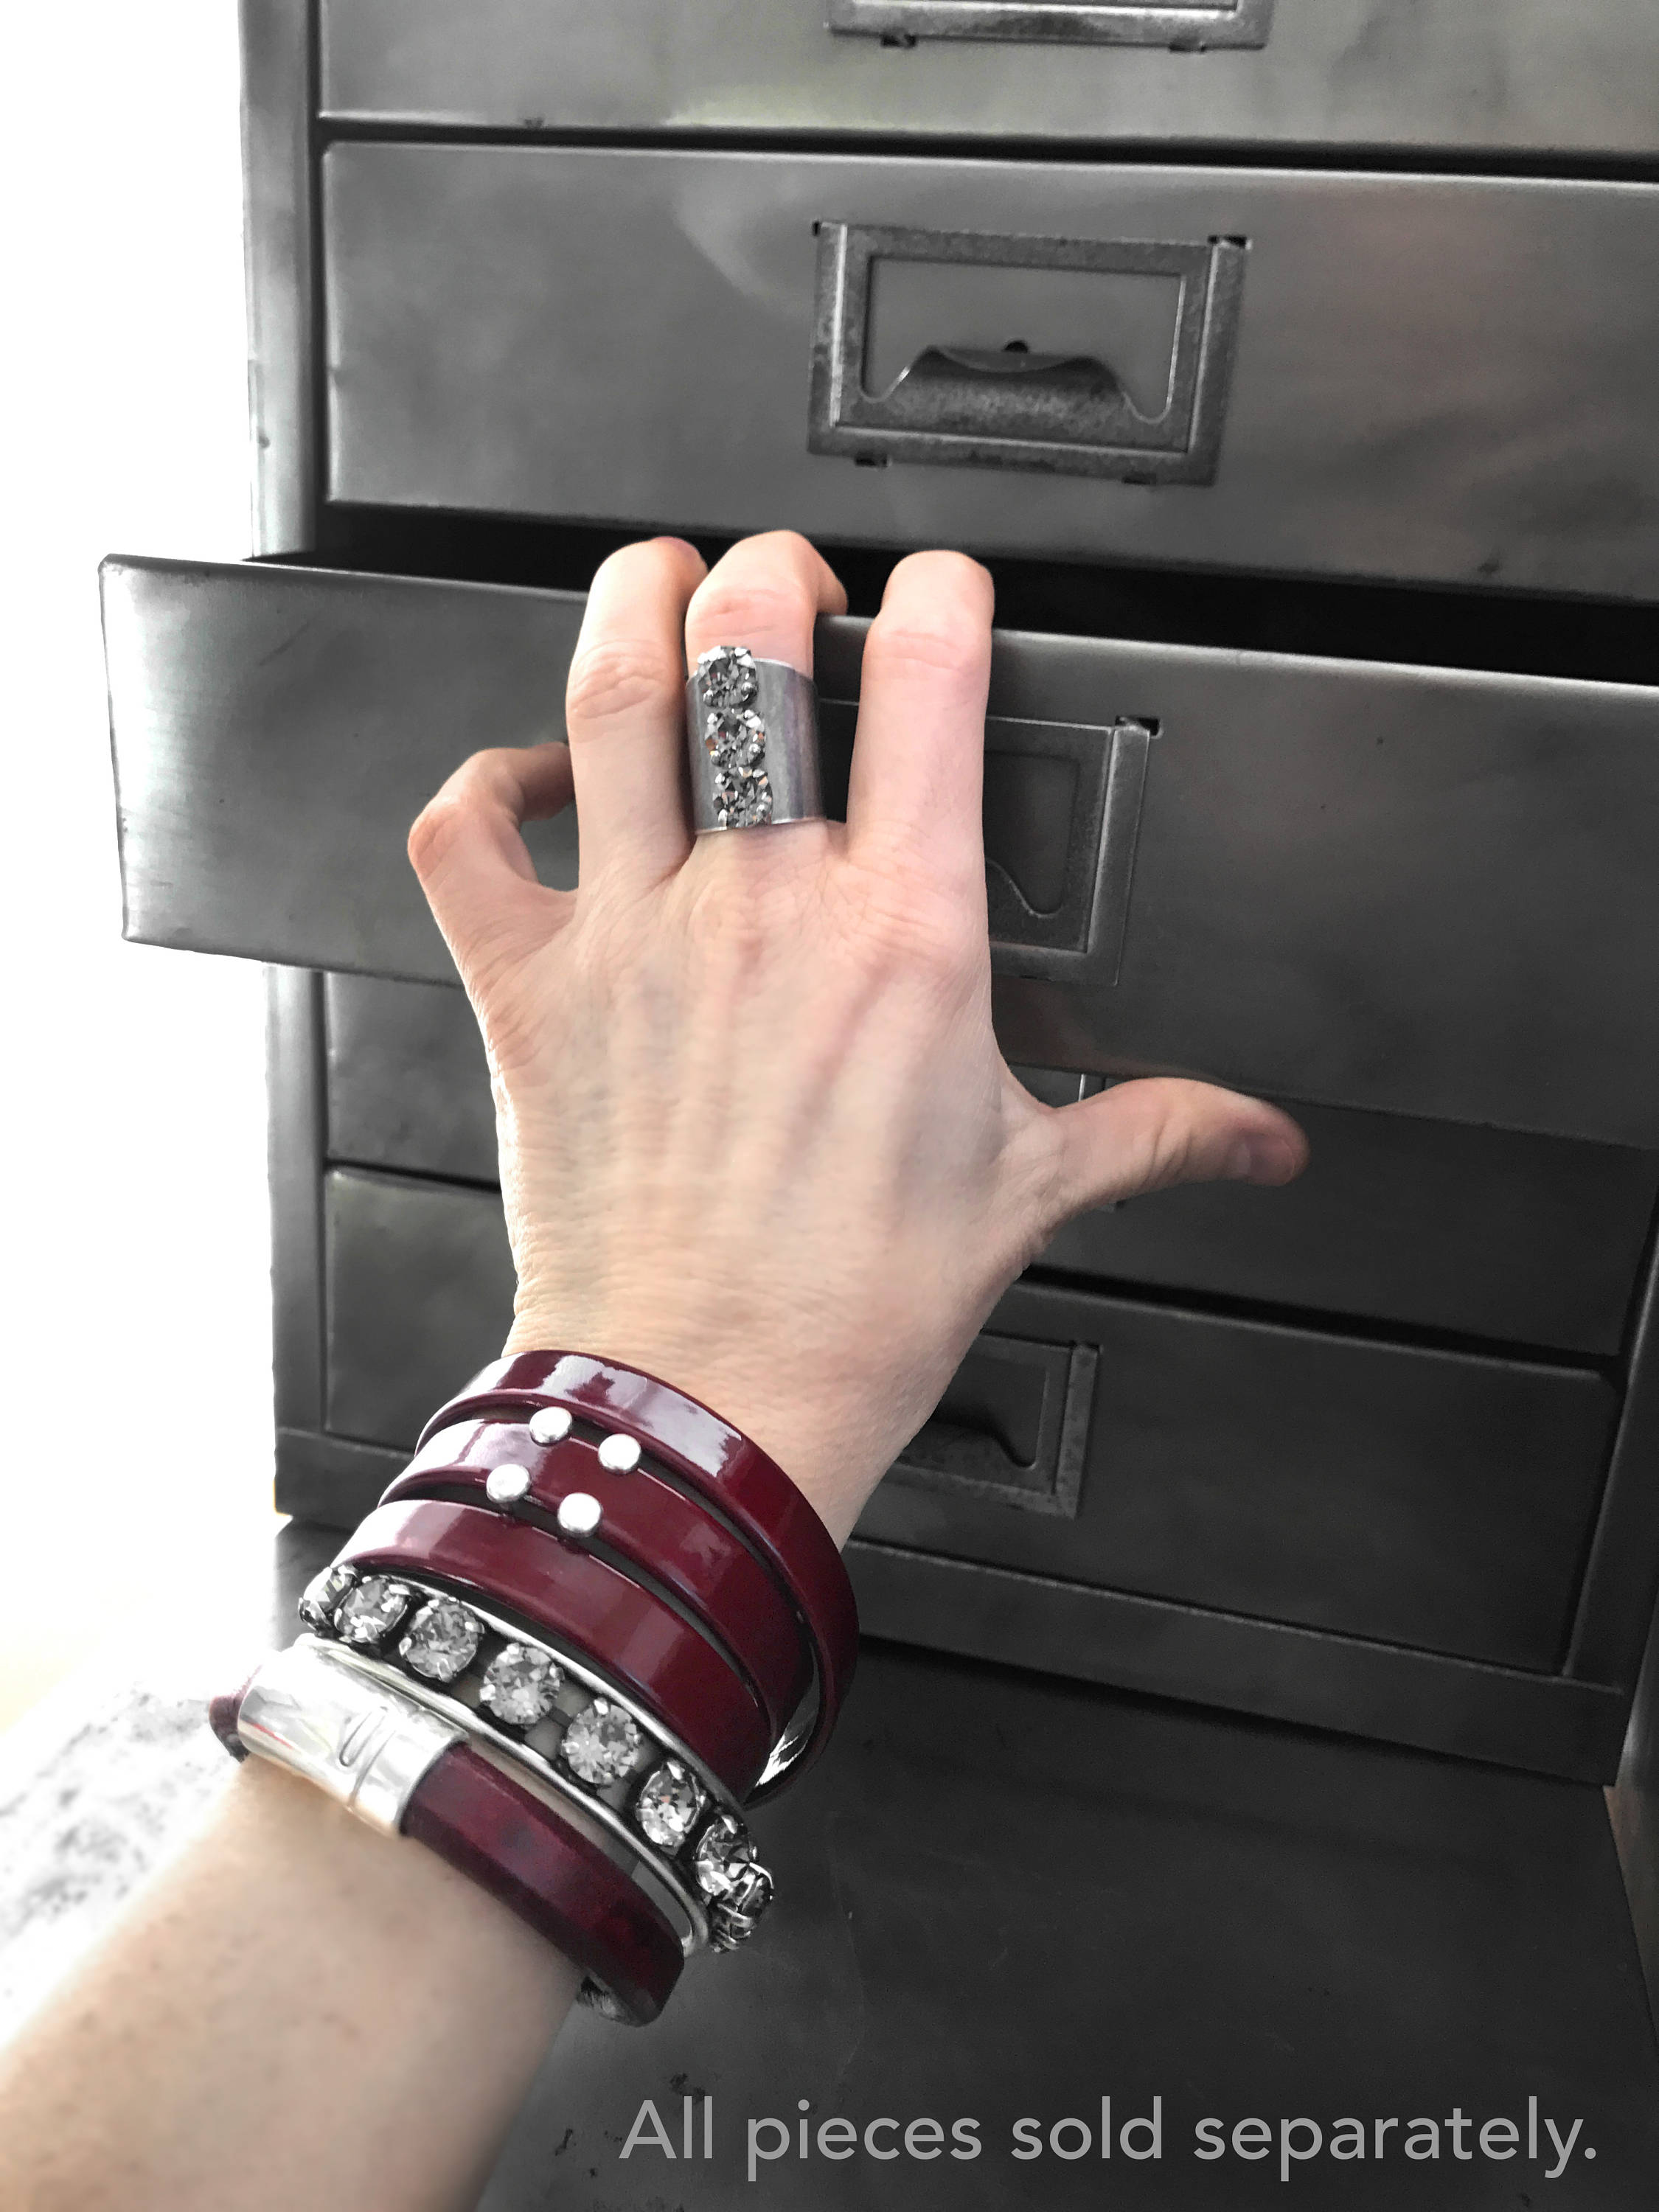 Oxblood Red Leather Bracelet with Silver Magnetic Clasp - Unisex